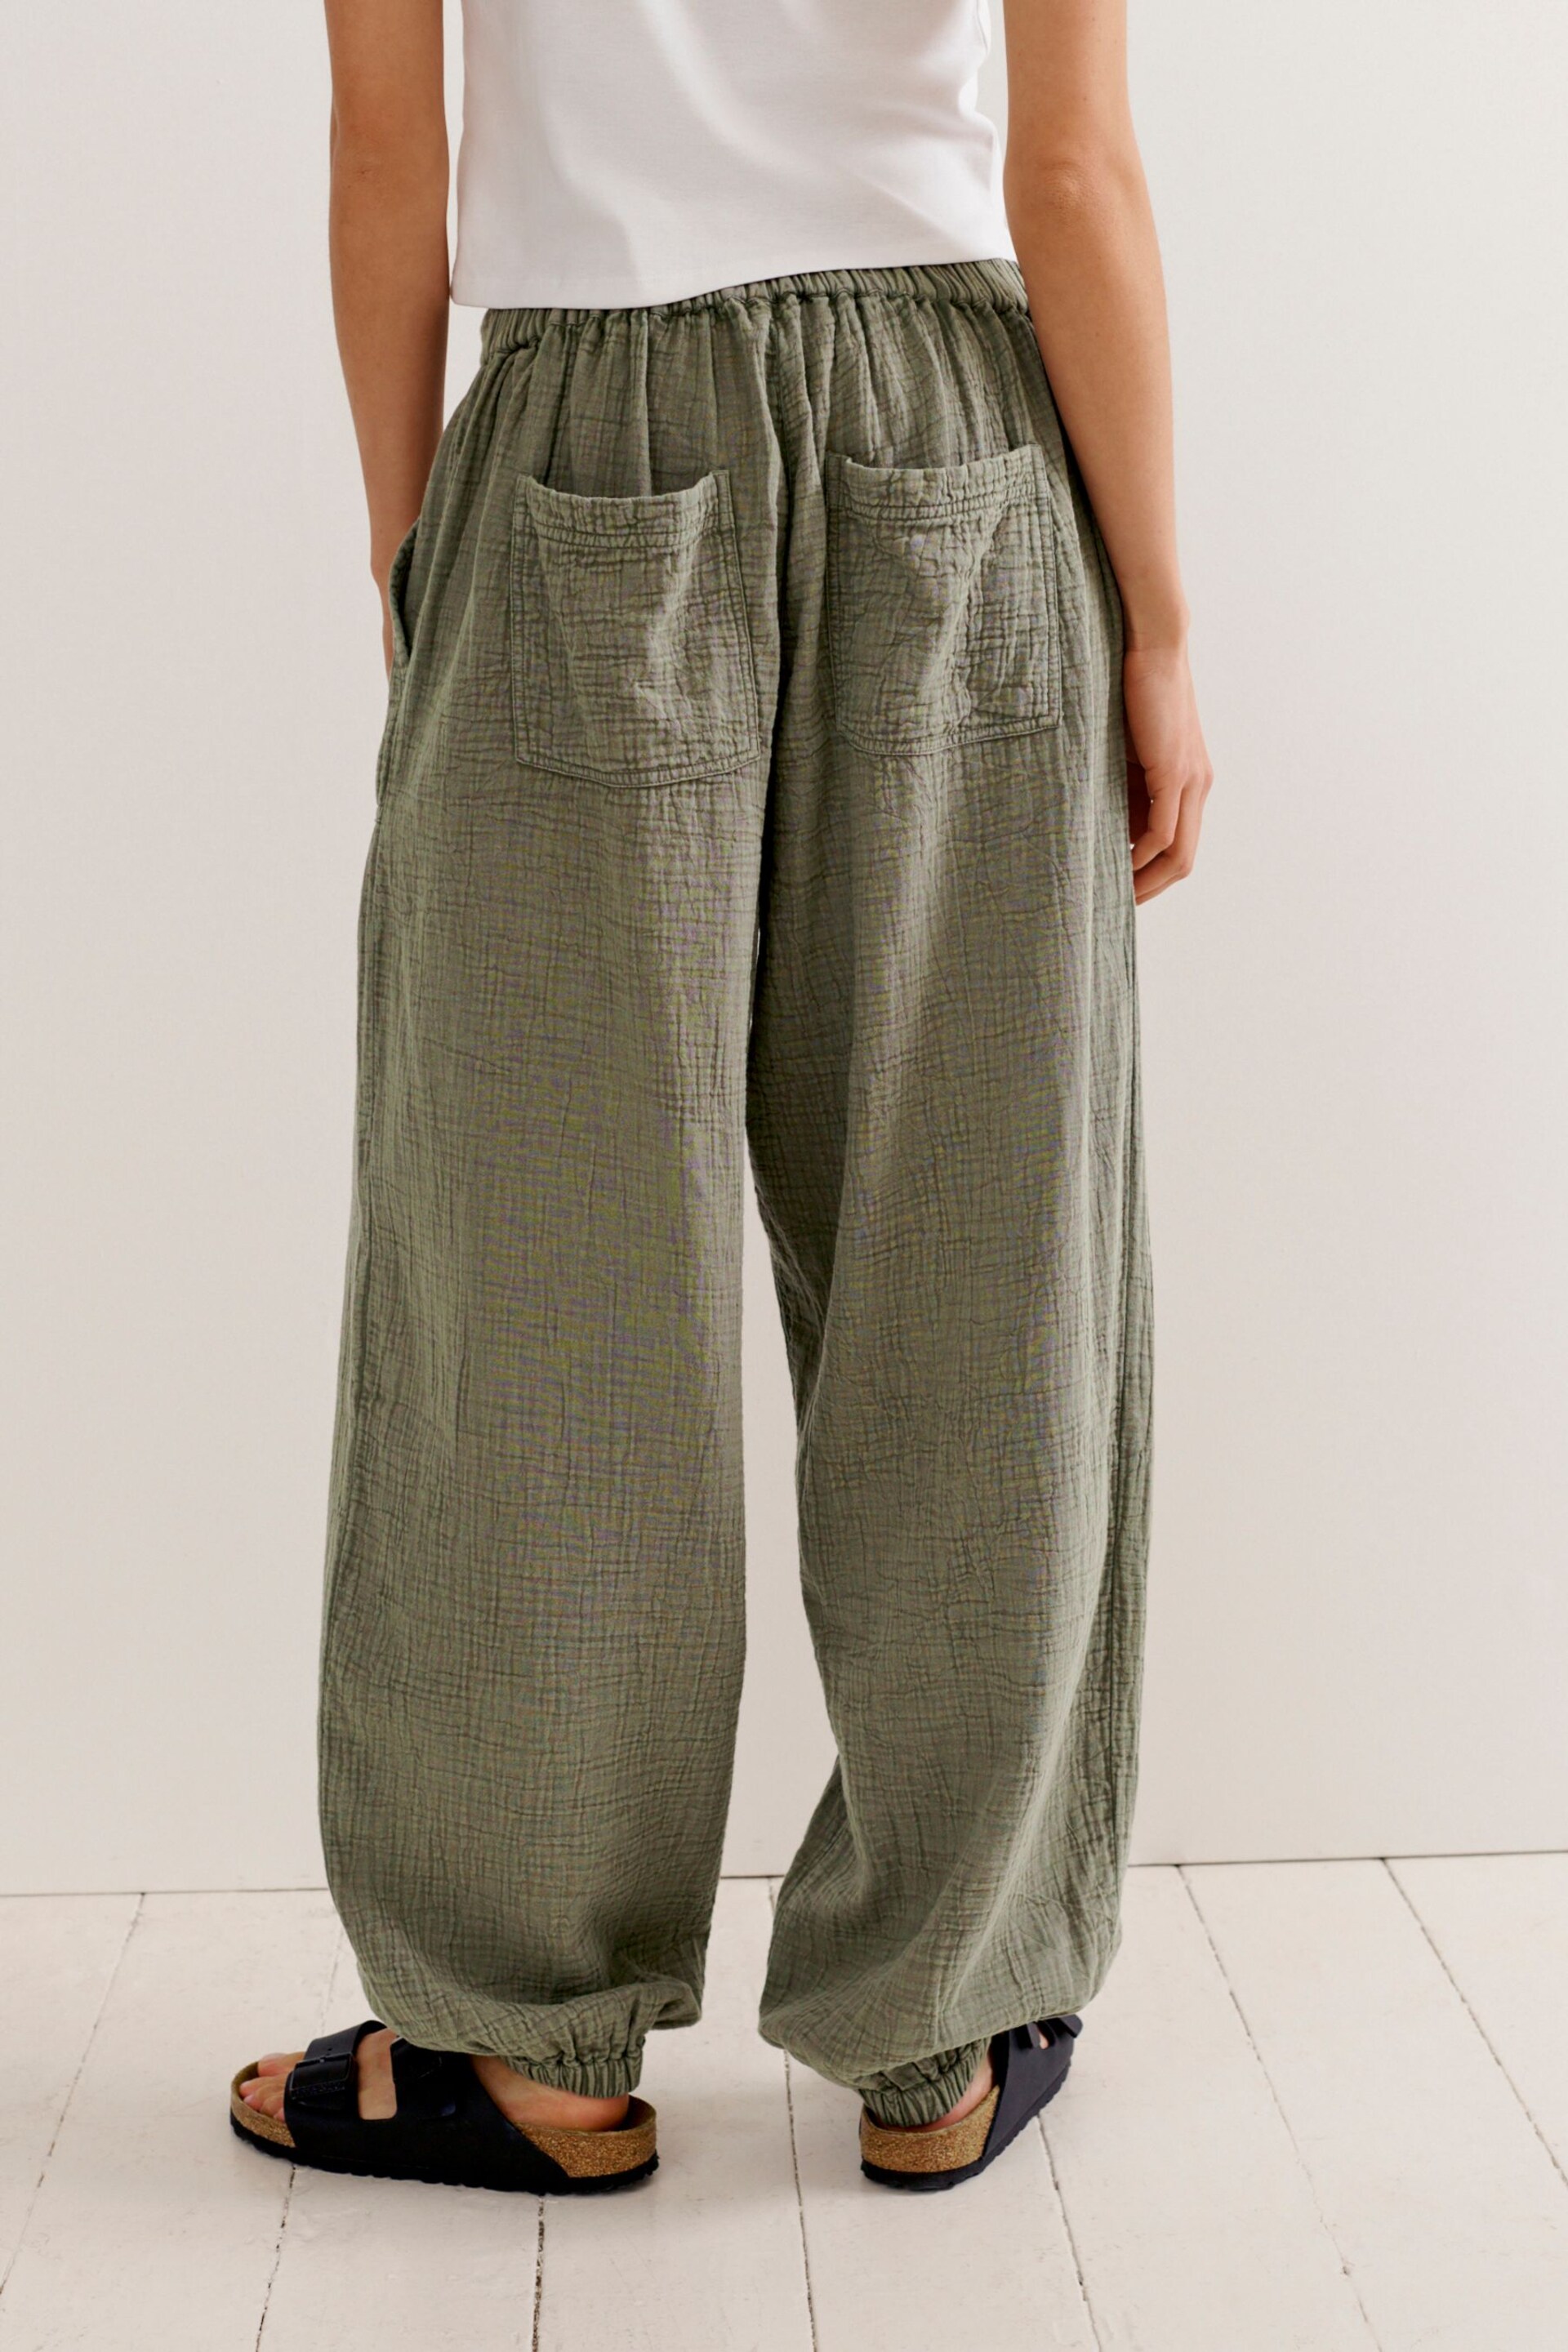 Khaki Green Textured Cotton Pull On Trousers - Image 4 of 7